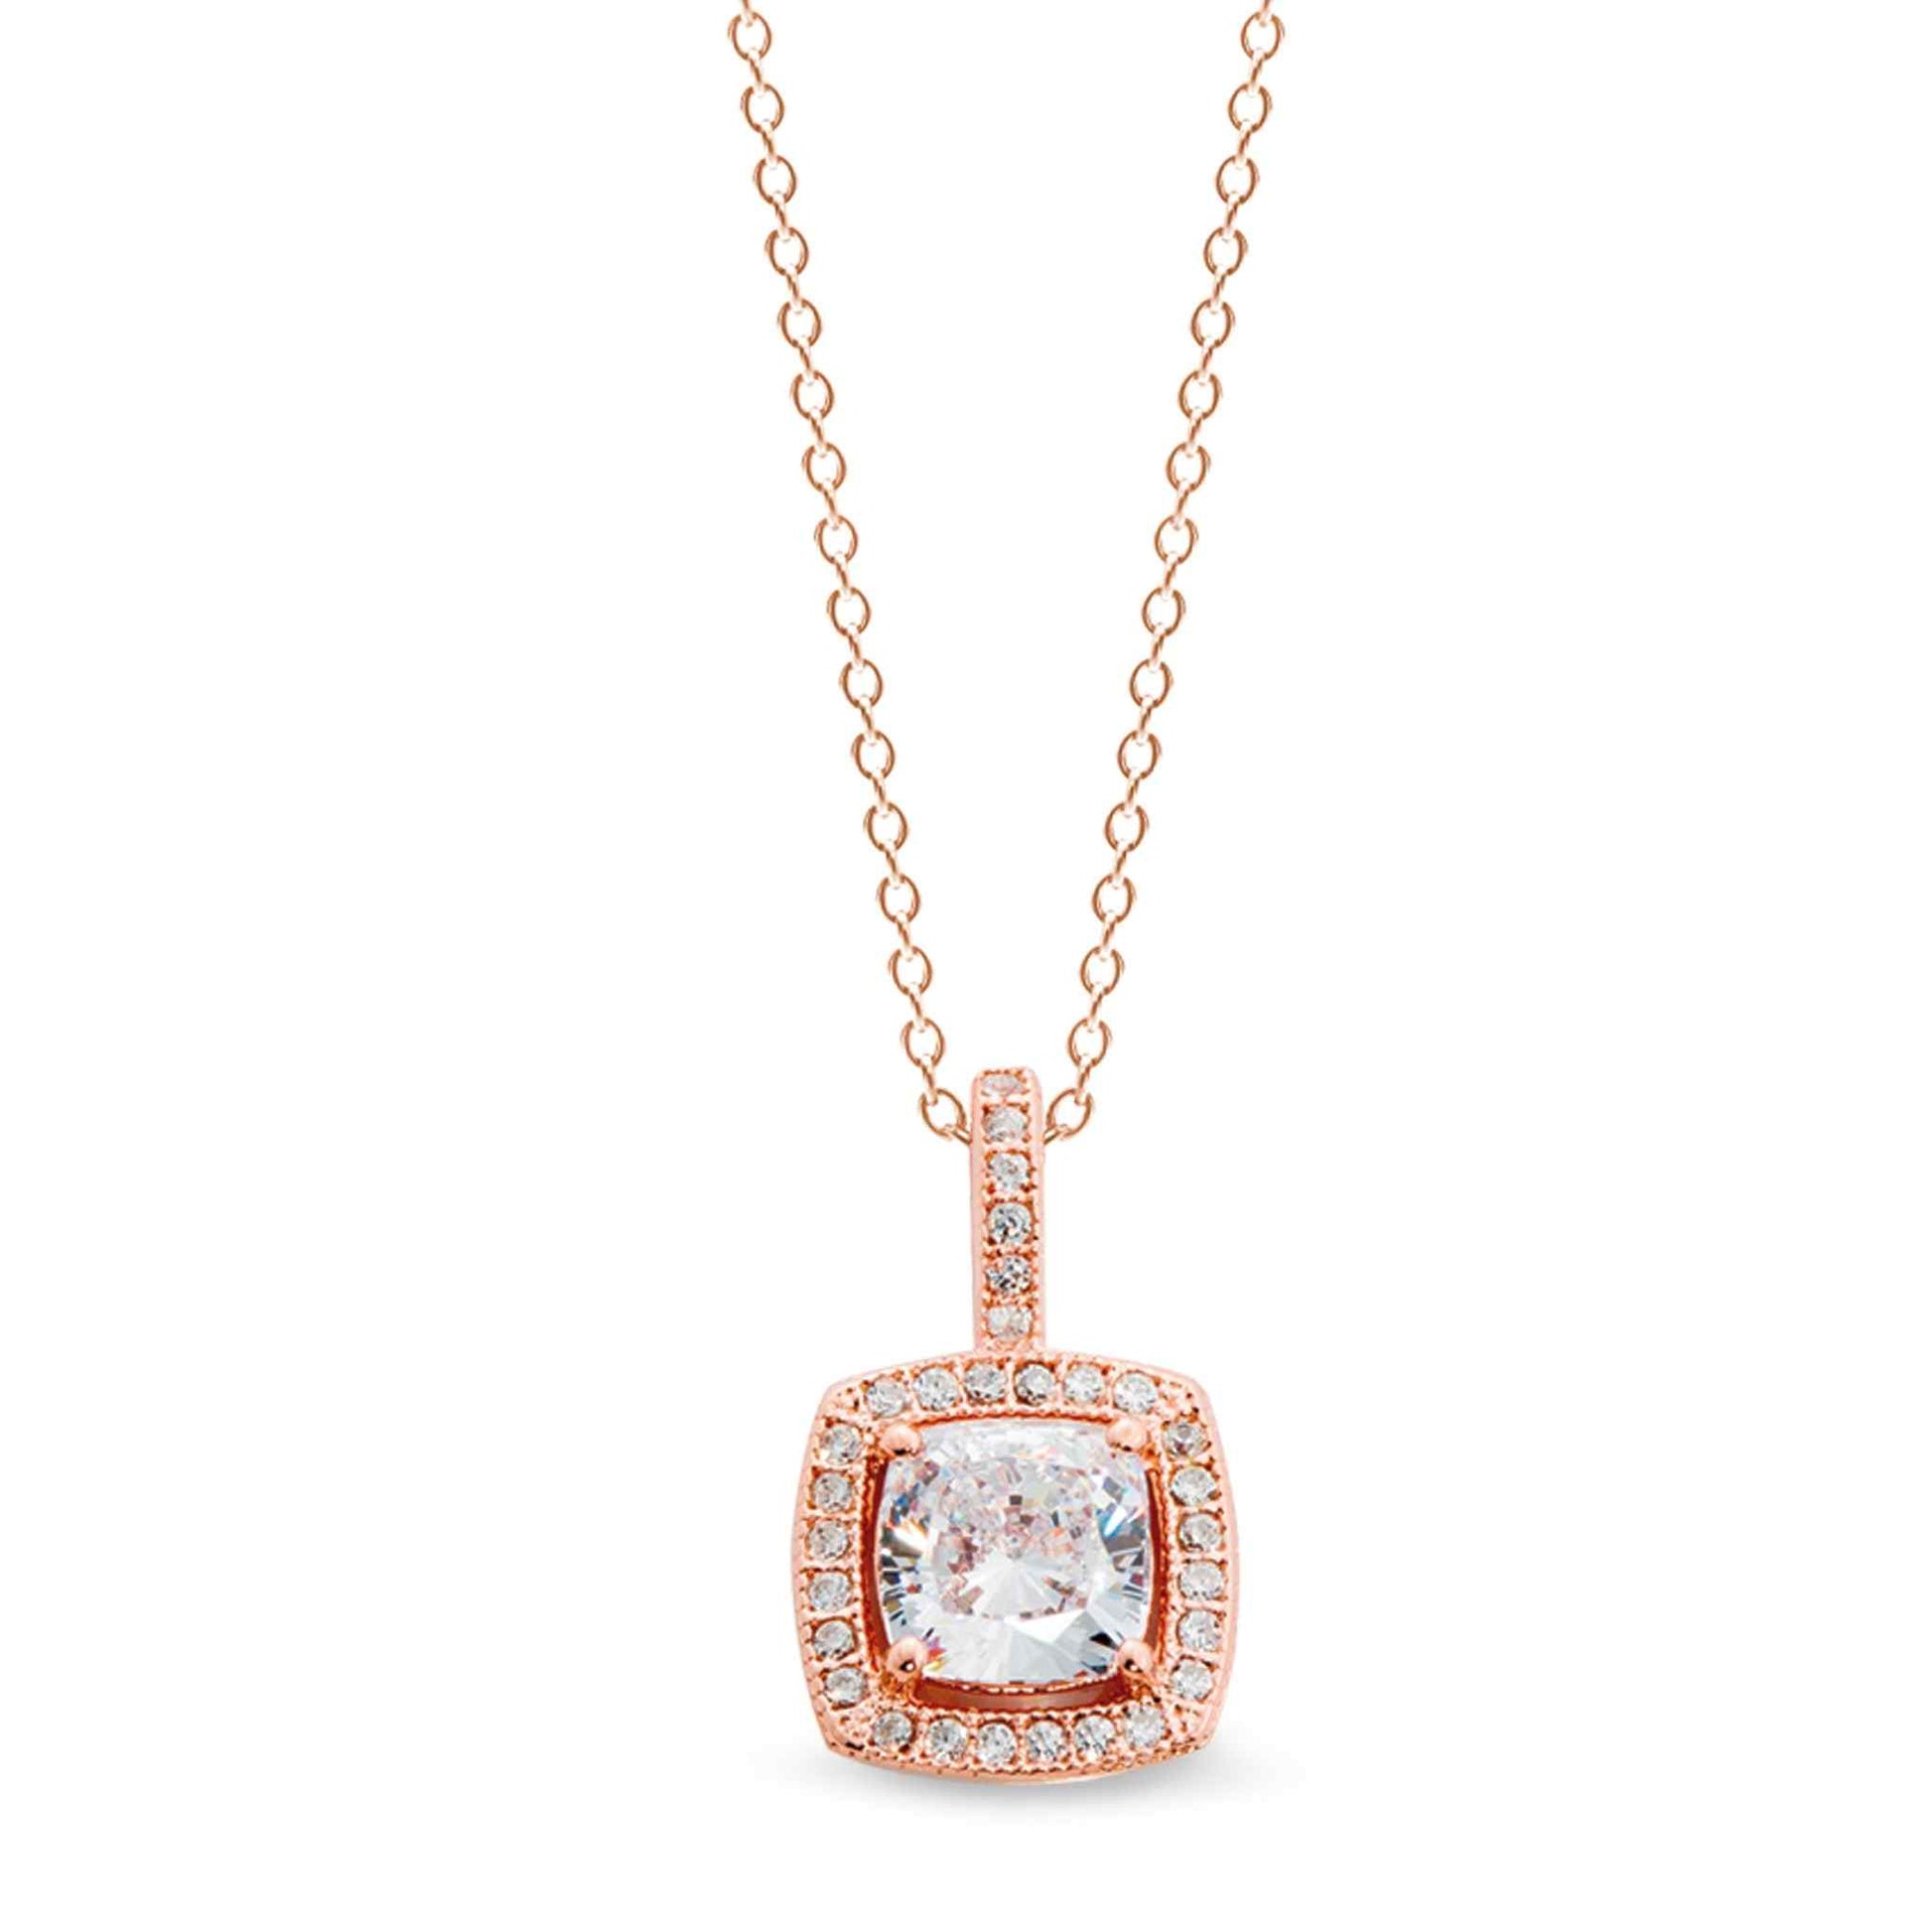 A cushion cut necklace with 30 simulated diamonds displayed on a neutral white background.